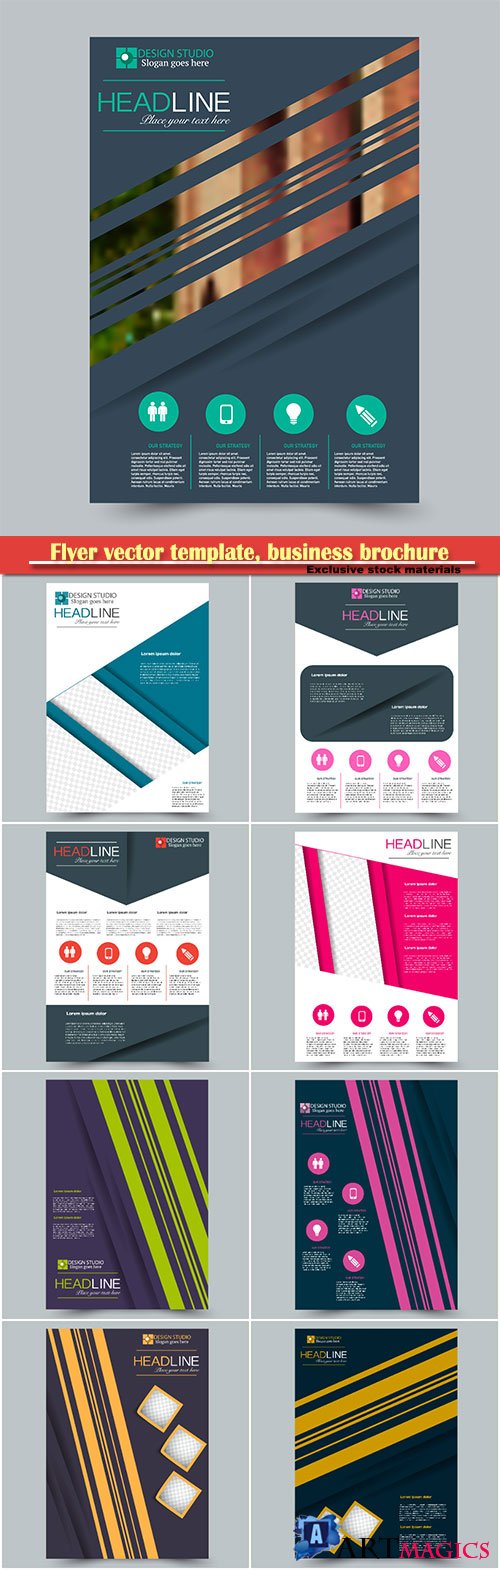 Flyer vector template, business brochure, magazine cover # 38